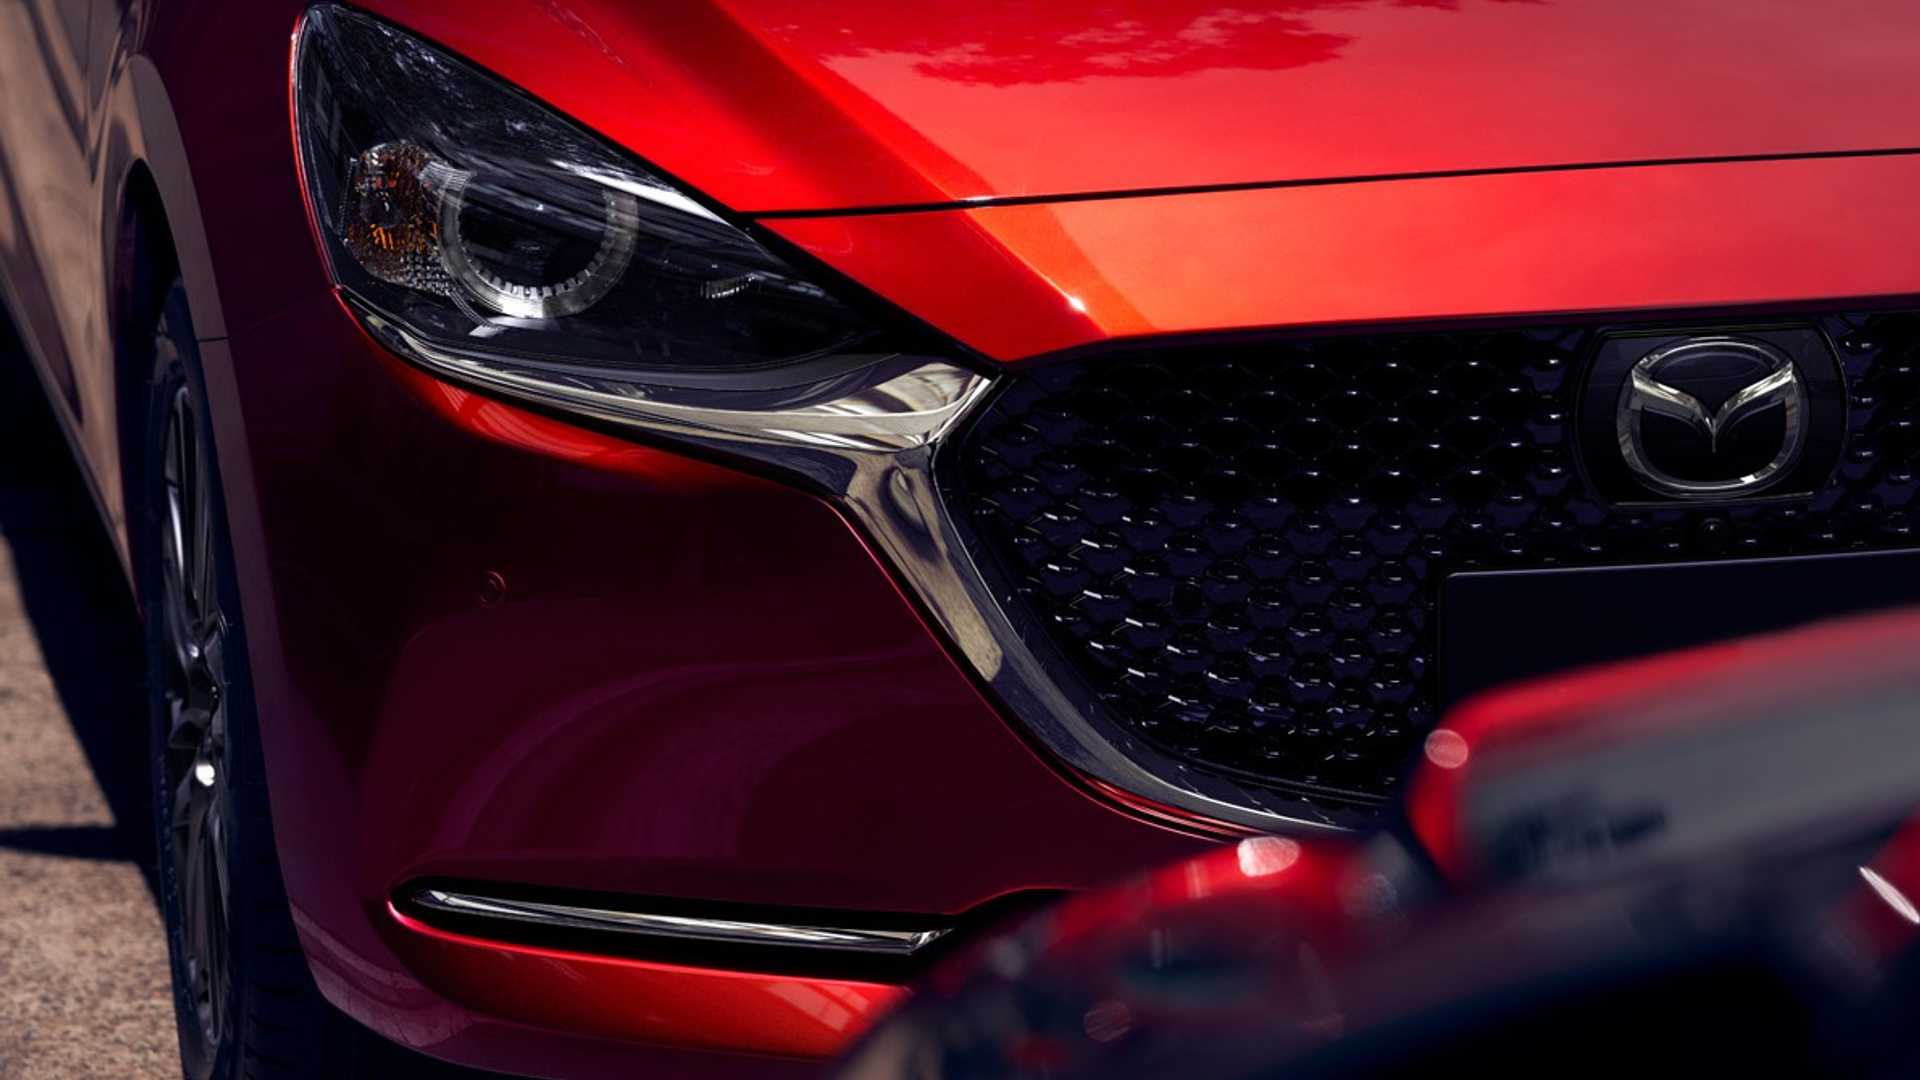 Mazda2 Revealed With More Tech And Refinement